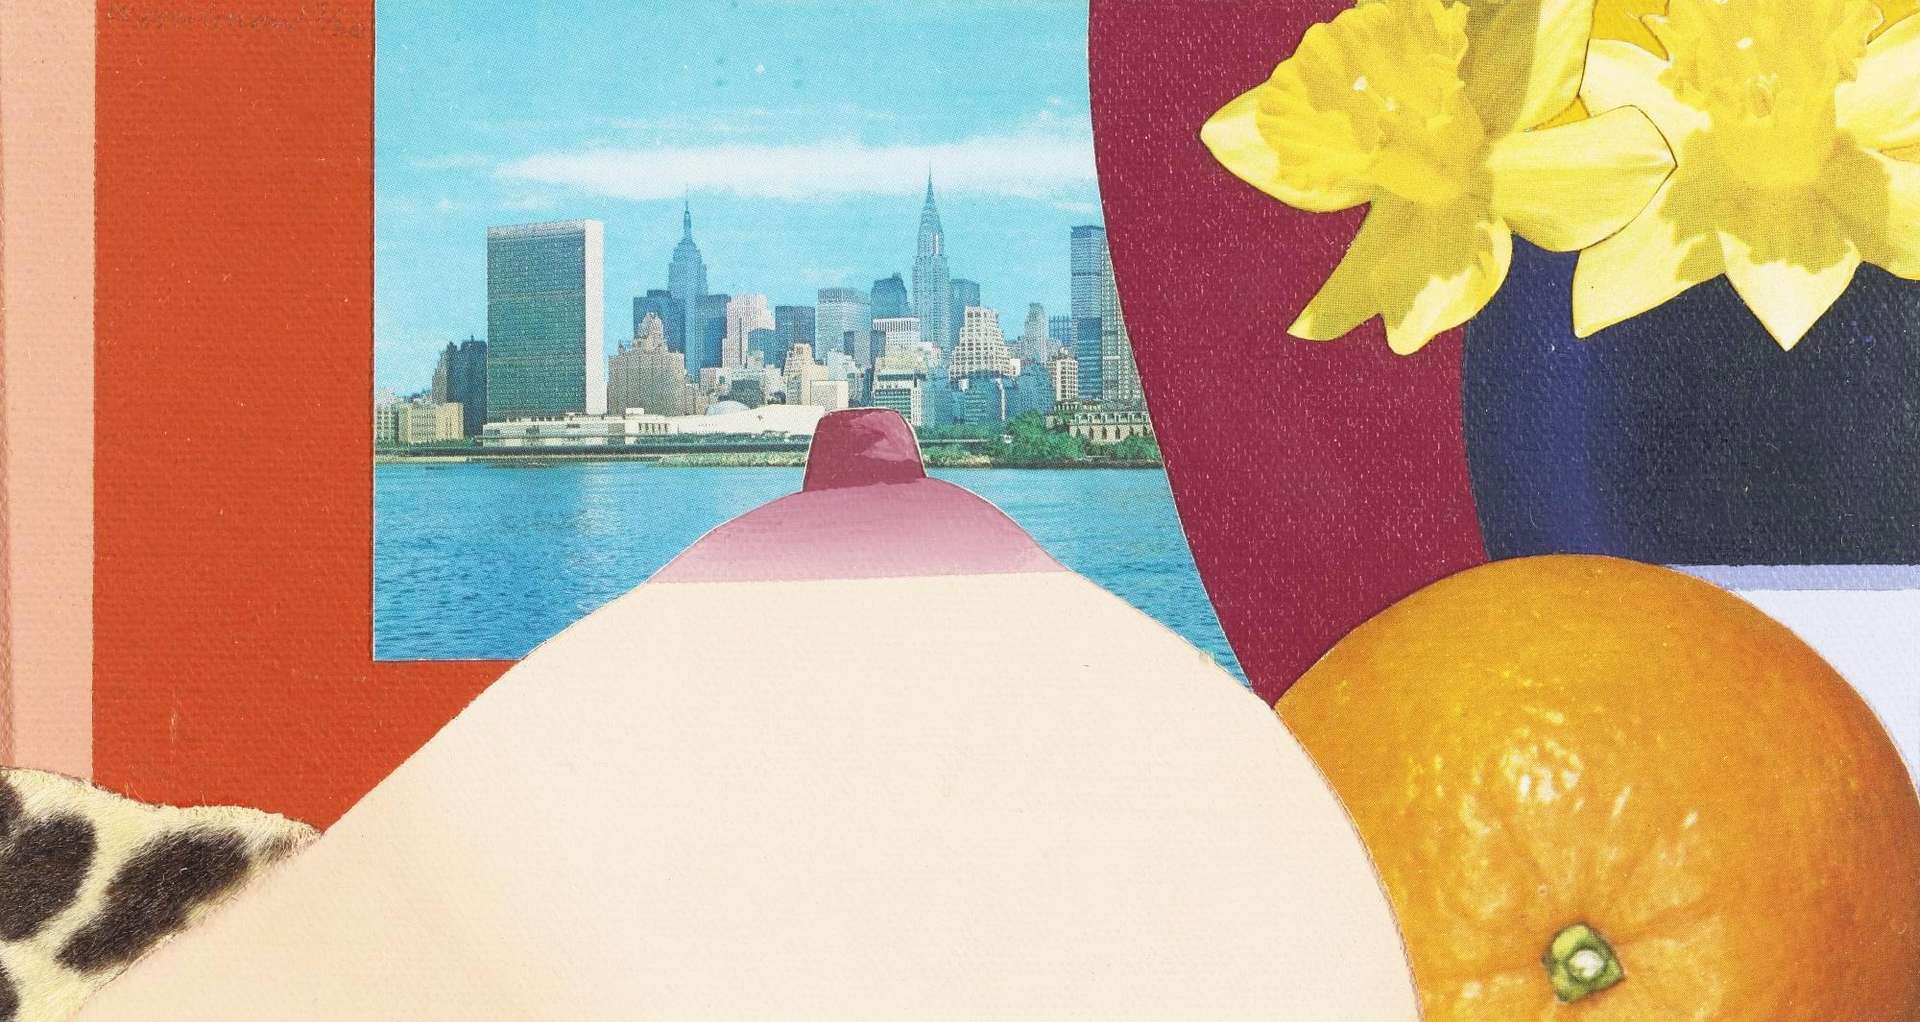 Close up of a woman’s nipple, an orange, yellow flowers collaged onto a backdrop of New York’s skyline over water.